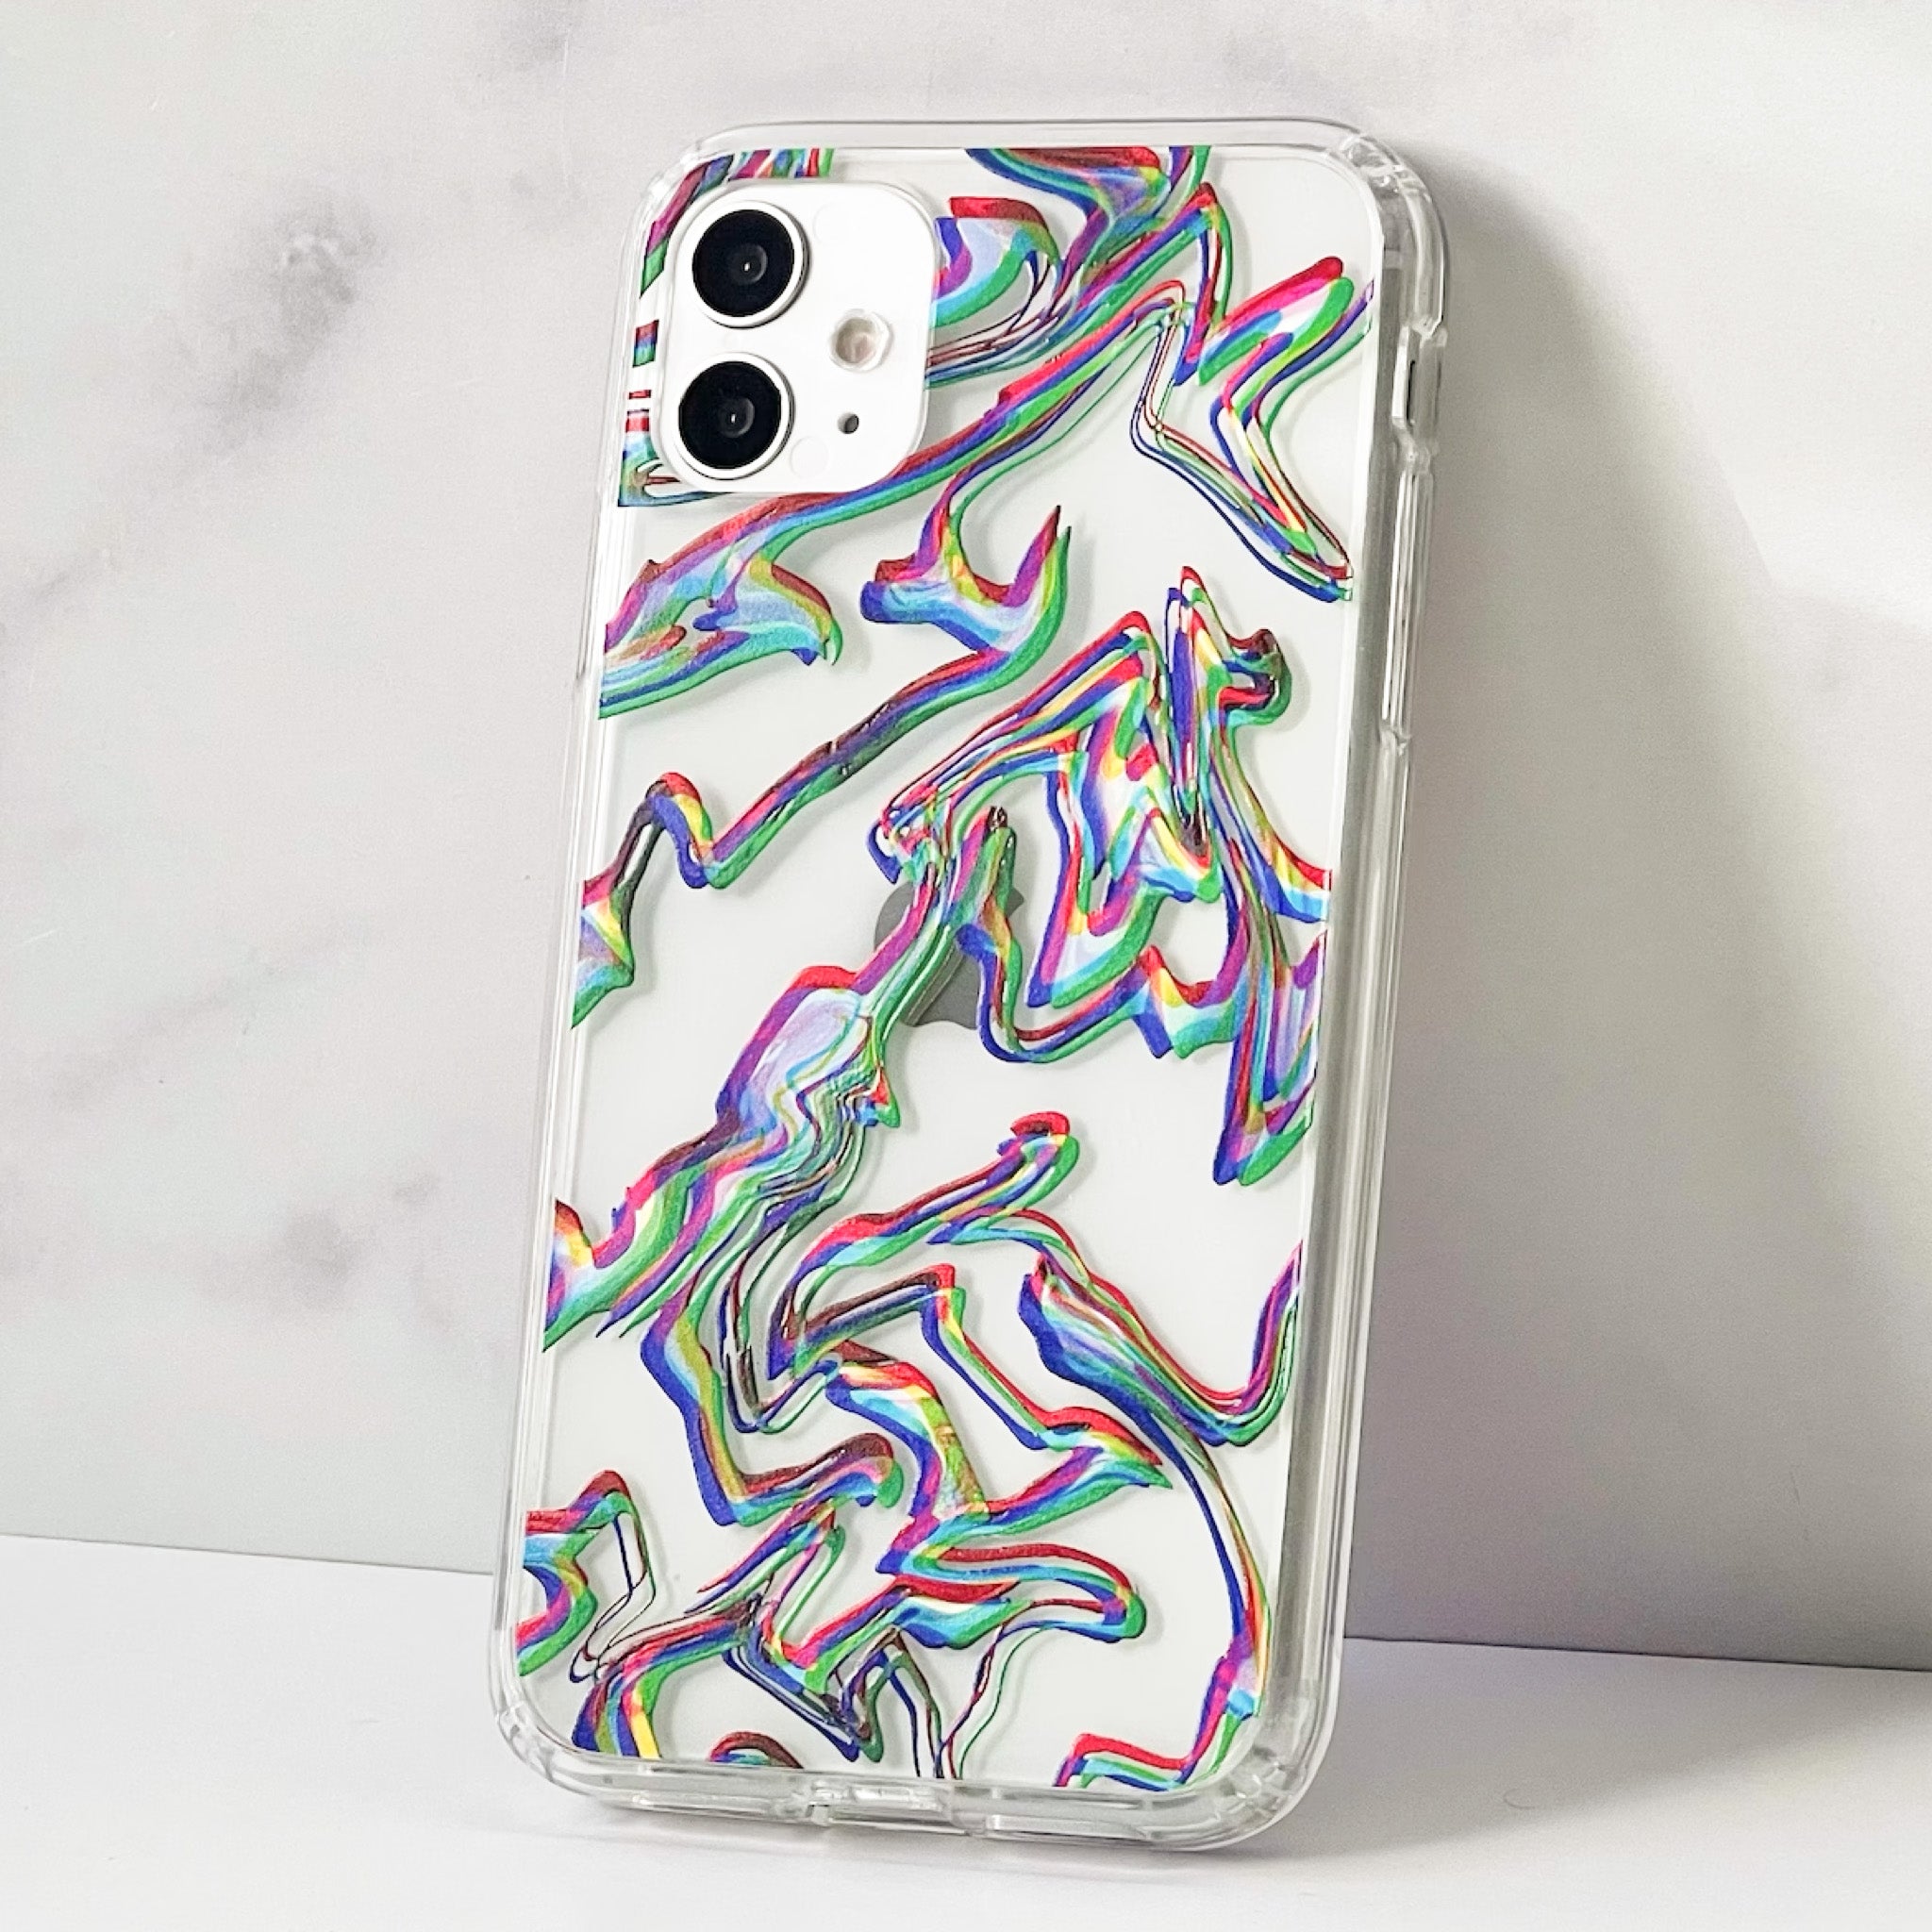 For holographic iphone case/iphone case 13 pro/case iphone 13/iphone case  12/11 iphone cases/christmas phone case/halloween phone case iphone 11/iphone  case x 